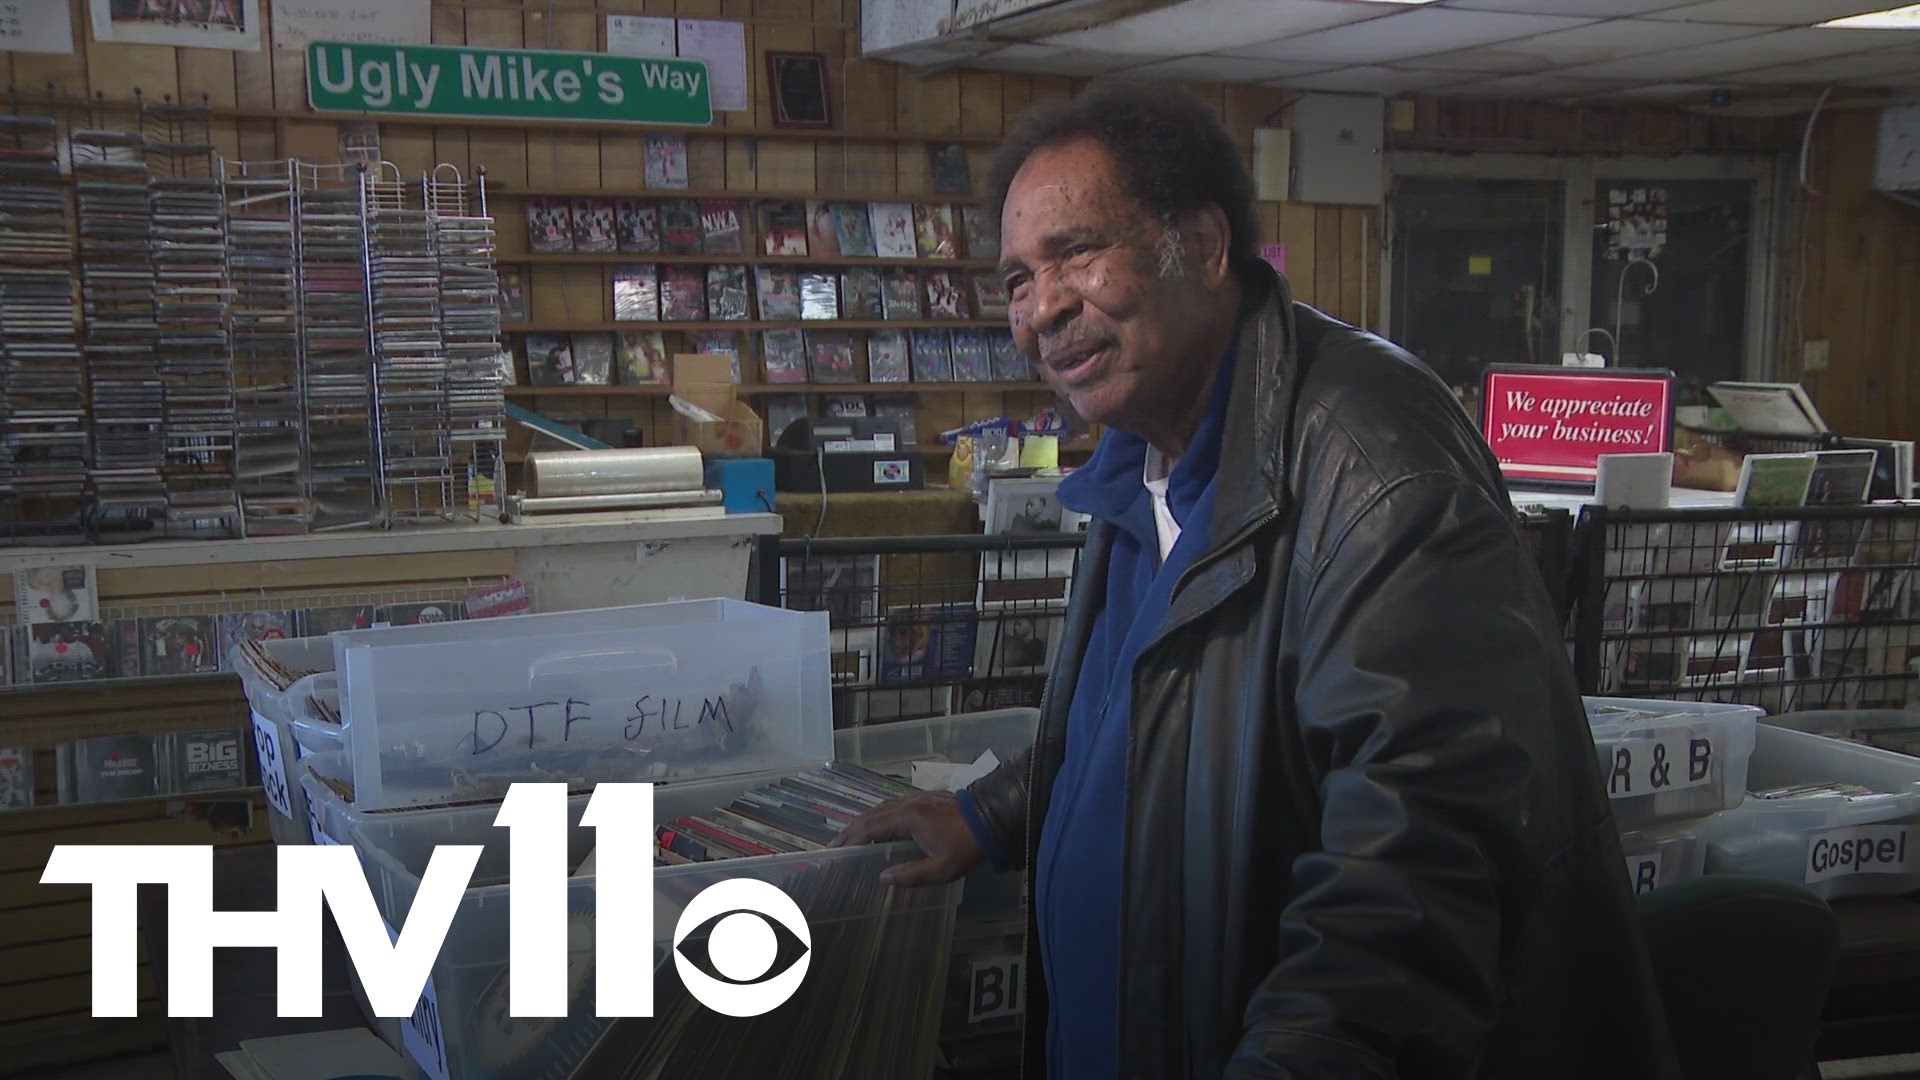 They say things always come back in style, but as Ugly Mike shows us at his Little Rock record shop, those old relics never went out of style in the first place.